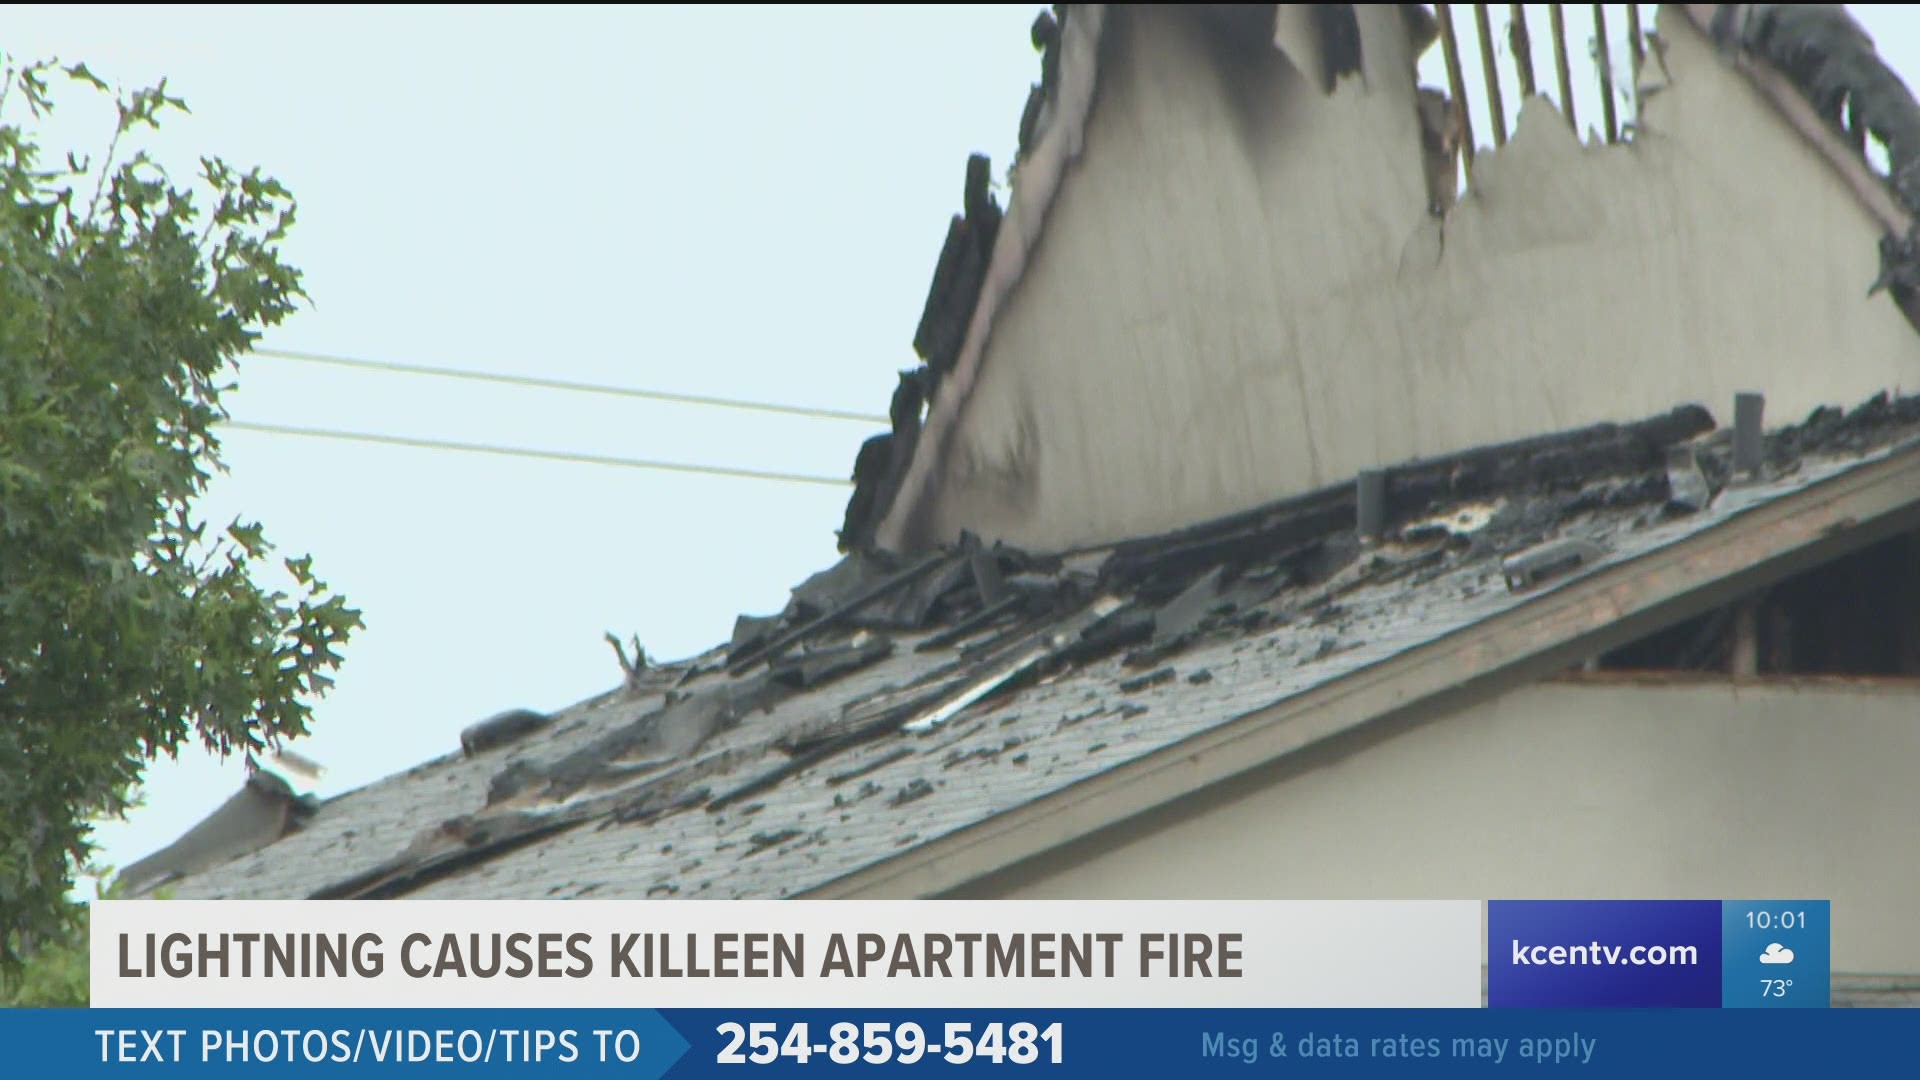 The fire that sparked at a Killeen apartment Wednesday night was described to be labor intensive by the fire chief. Six units were destroyed.